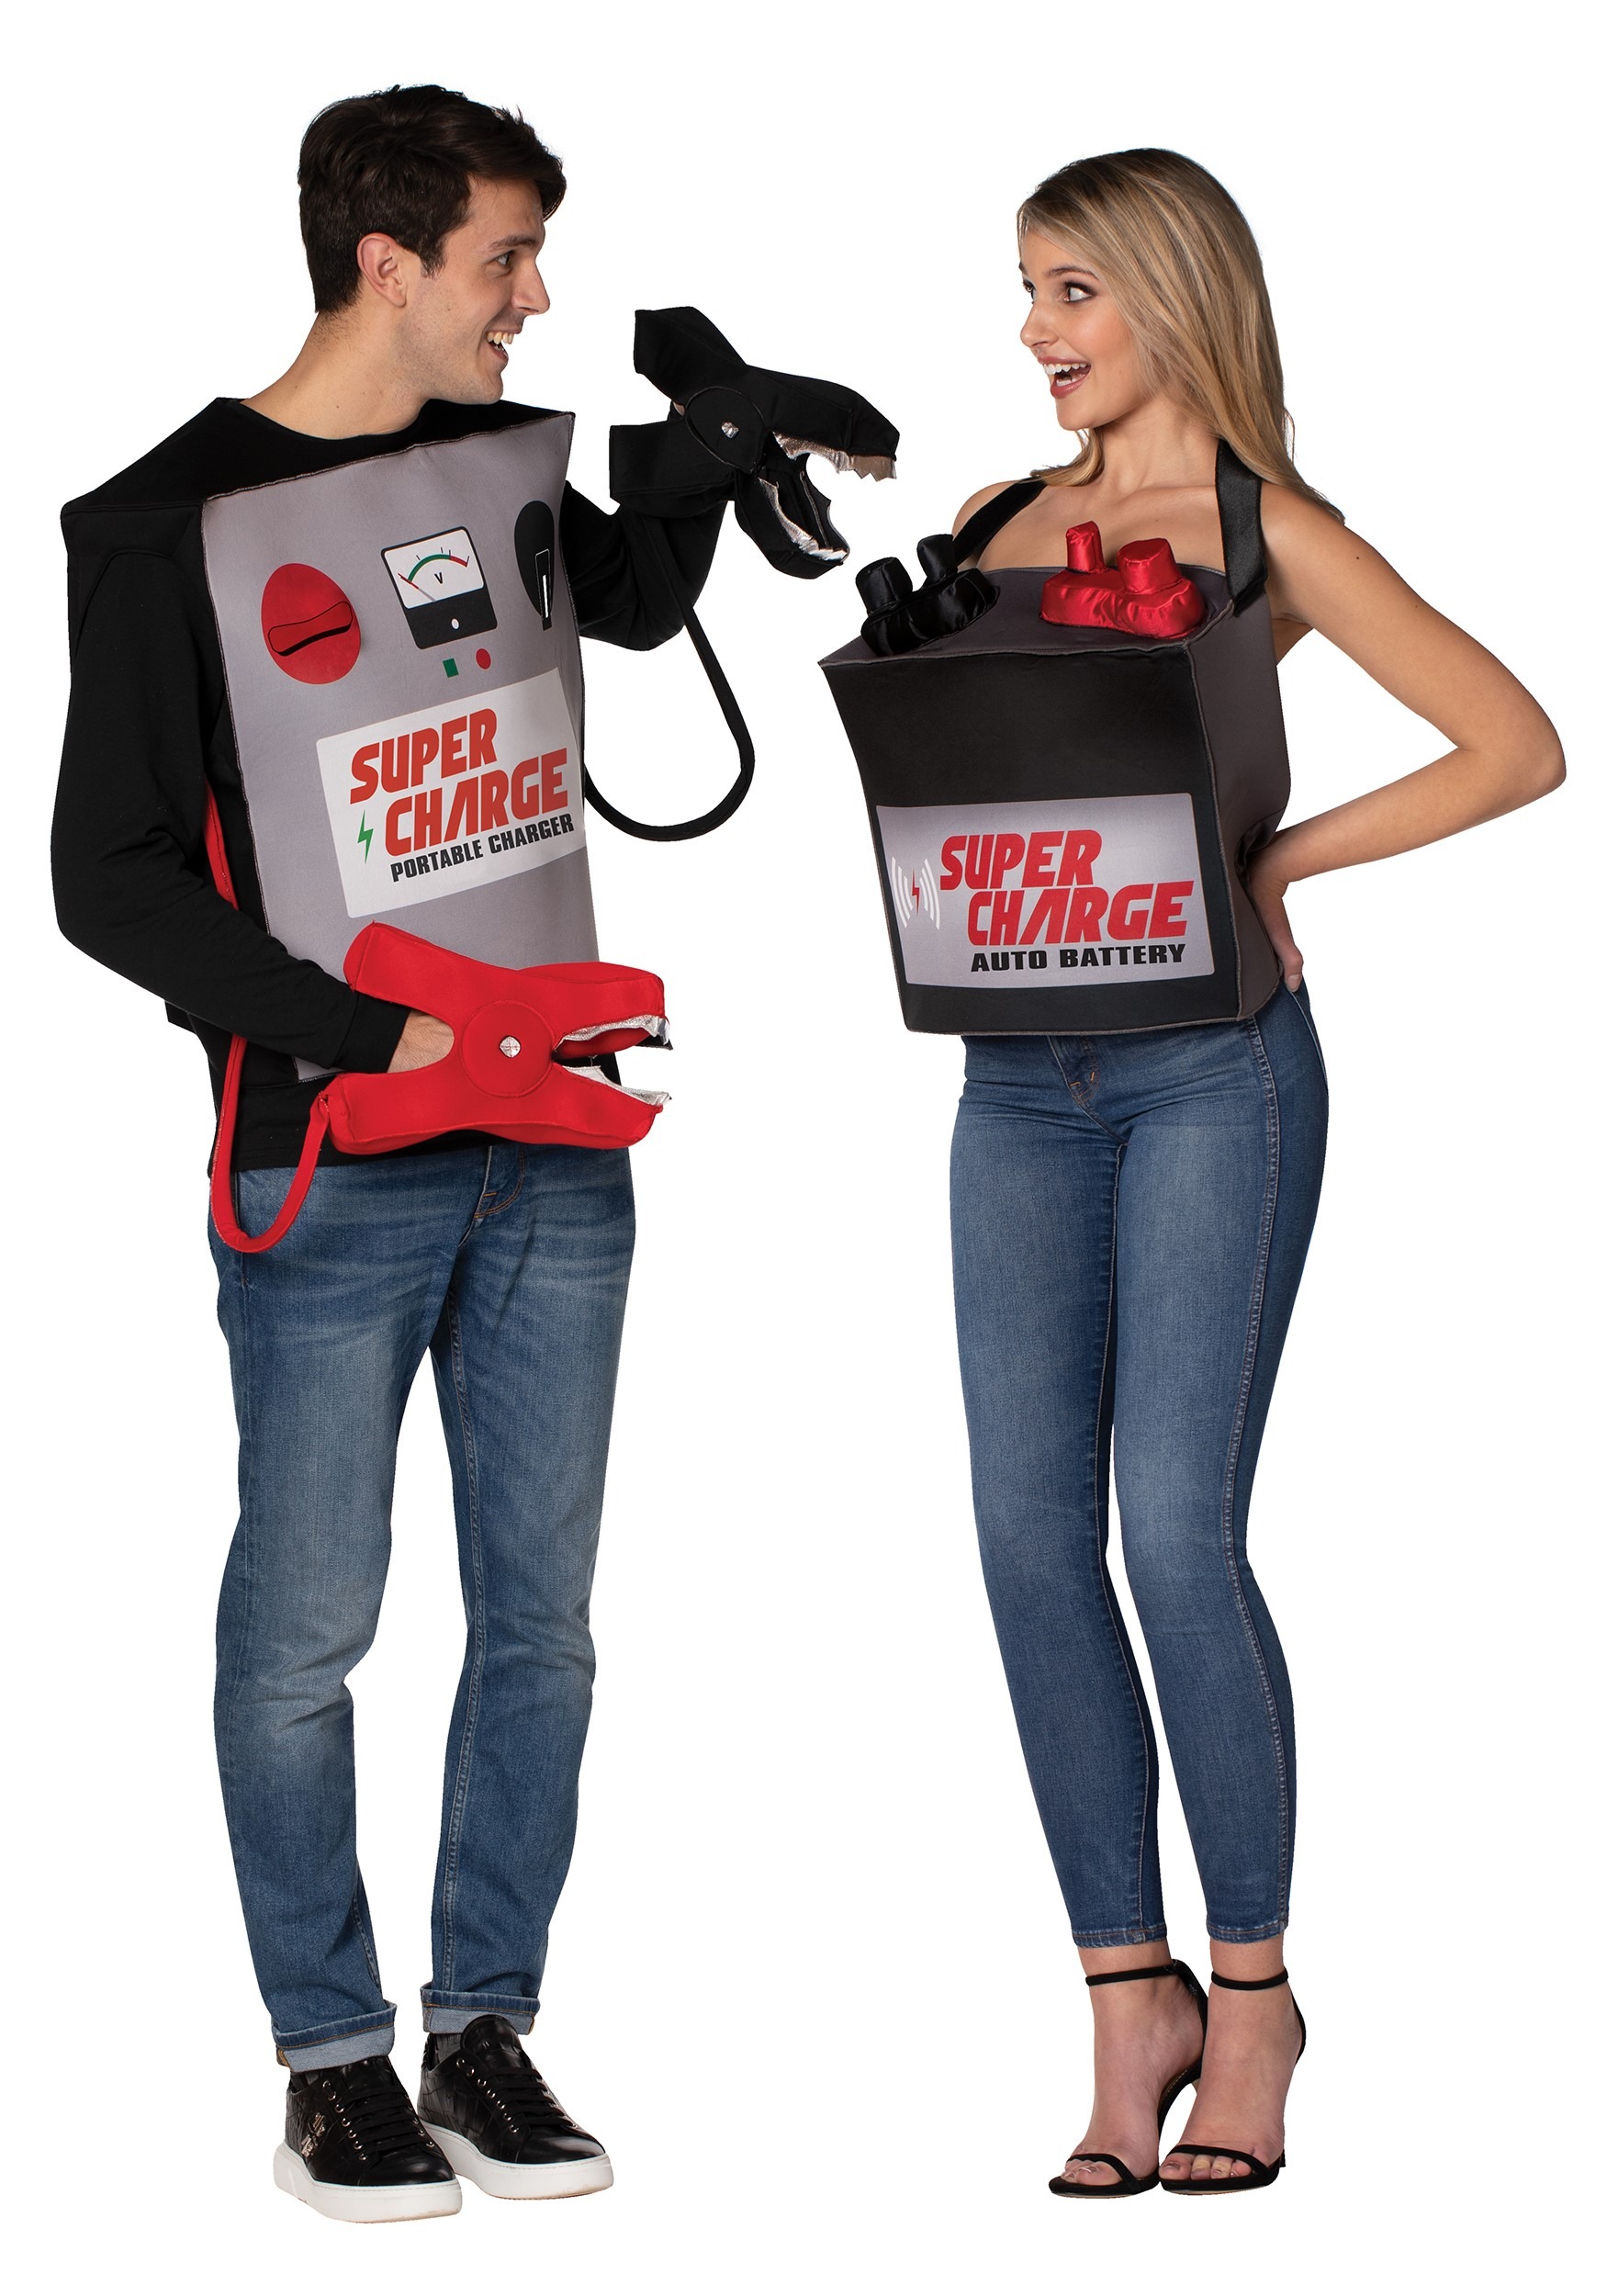 Battery & Jumper Cables Adult Couple's Fancy Dress Costume , Couples Fancy Dress Fancy Dress Costumes For Halloween